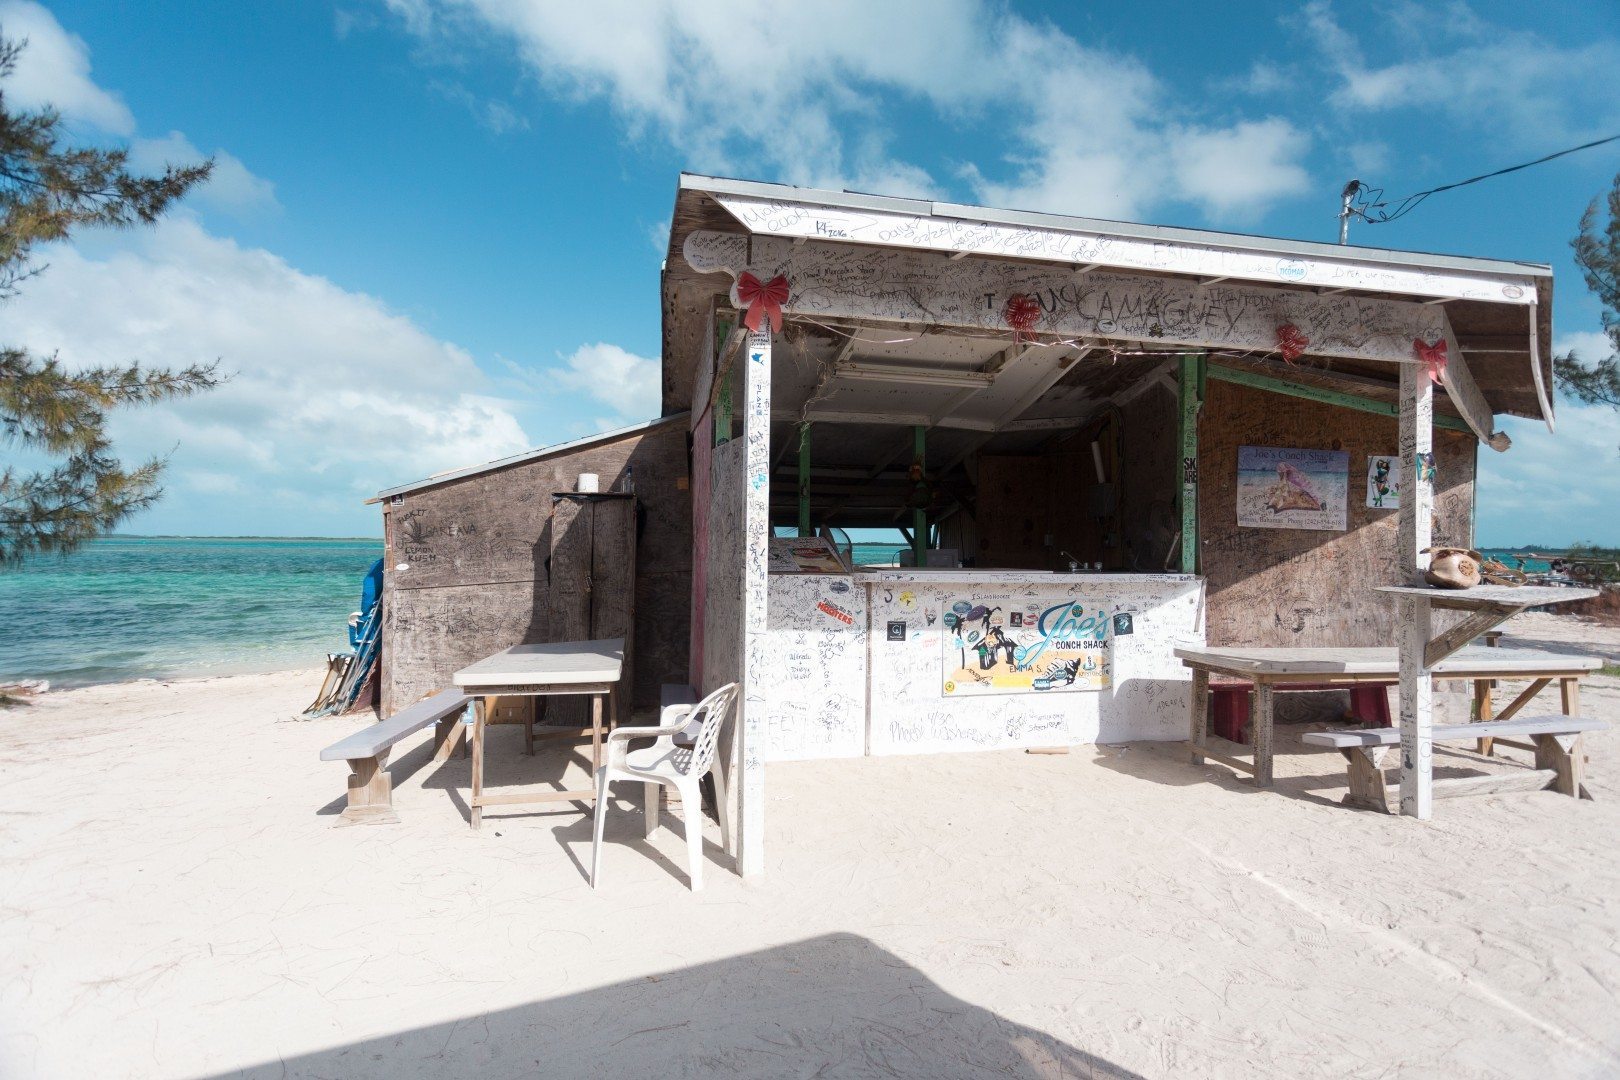 Joe's for conch salad. Try Edith's for pizza | TravelBreak